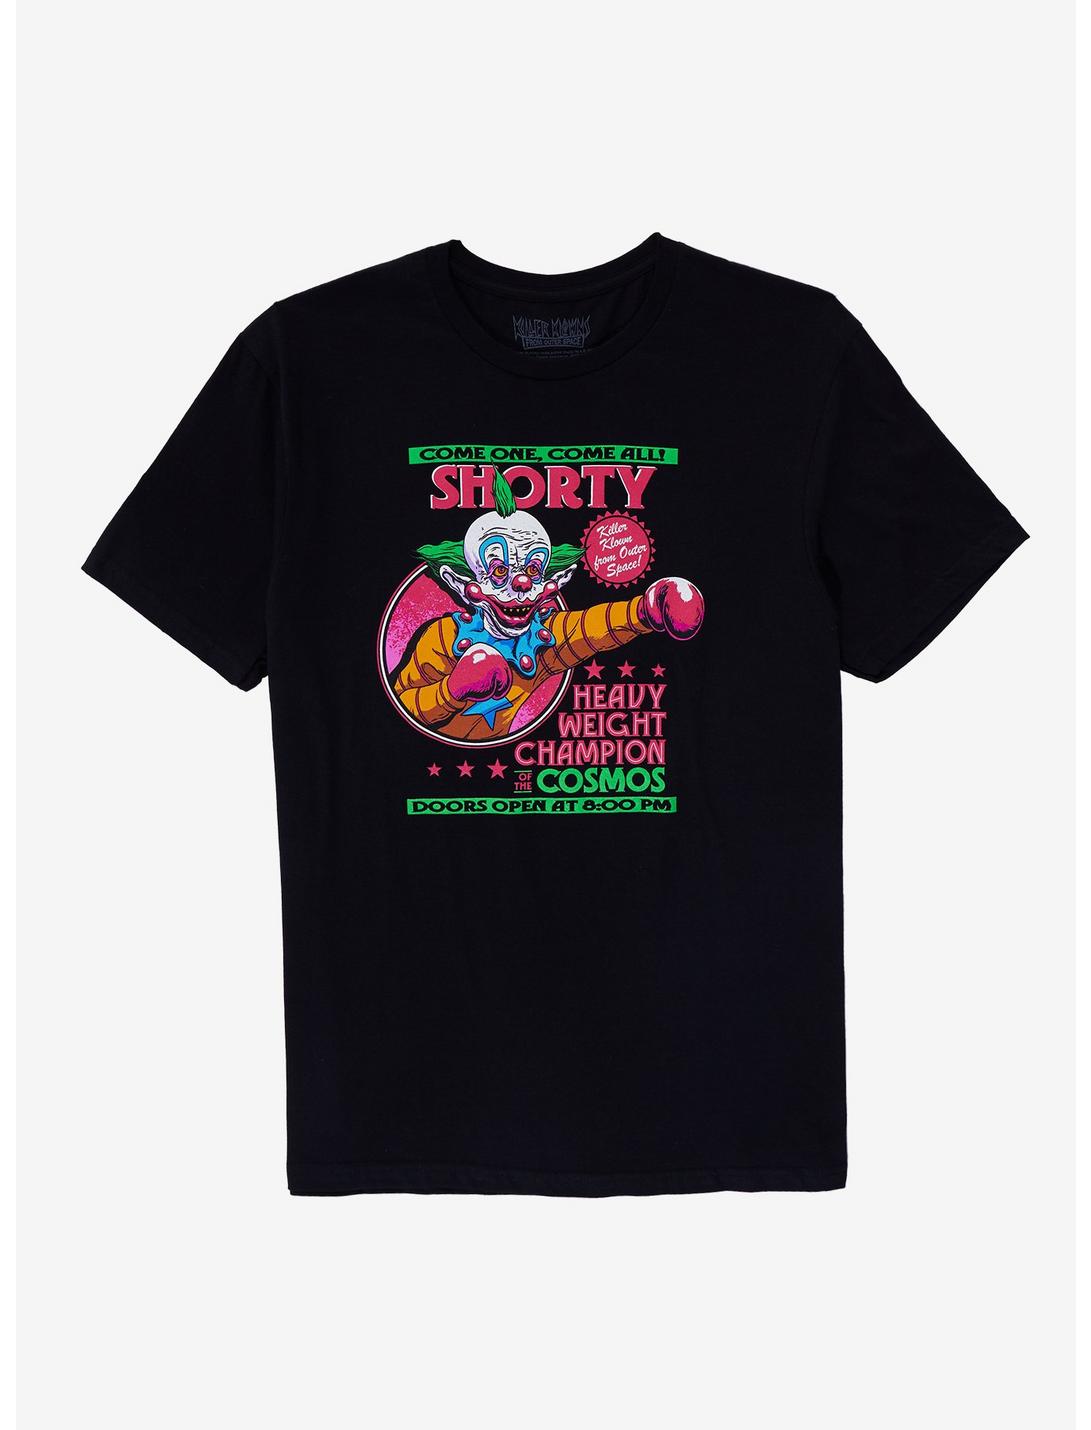 Killer Klowns From Outer Space Shorty Boxing T-Shirt, BLACK, hi-res